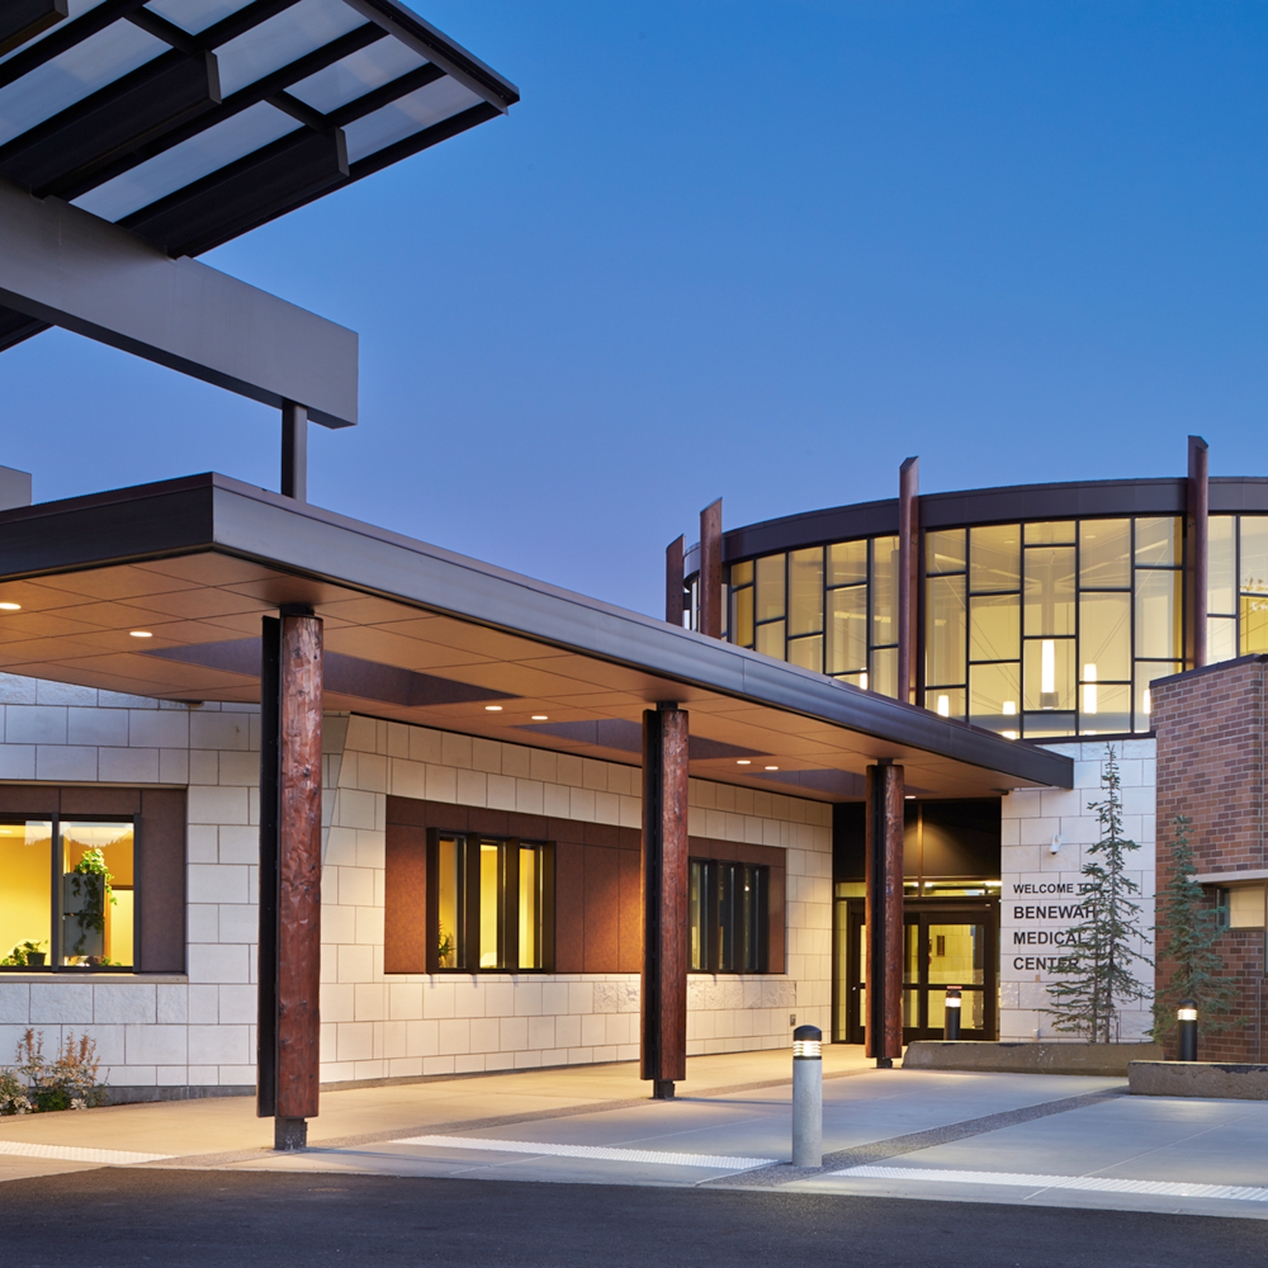 The Marimn
Health Medical Center (formerly the Benewah Medical Clinic)
incorporates architecture and detailing that references the tribe cultural and
historical precedents. — NAC Architecture